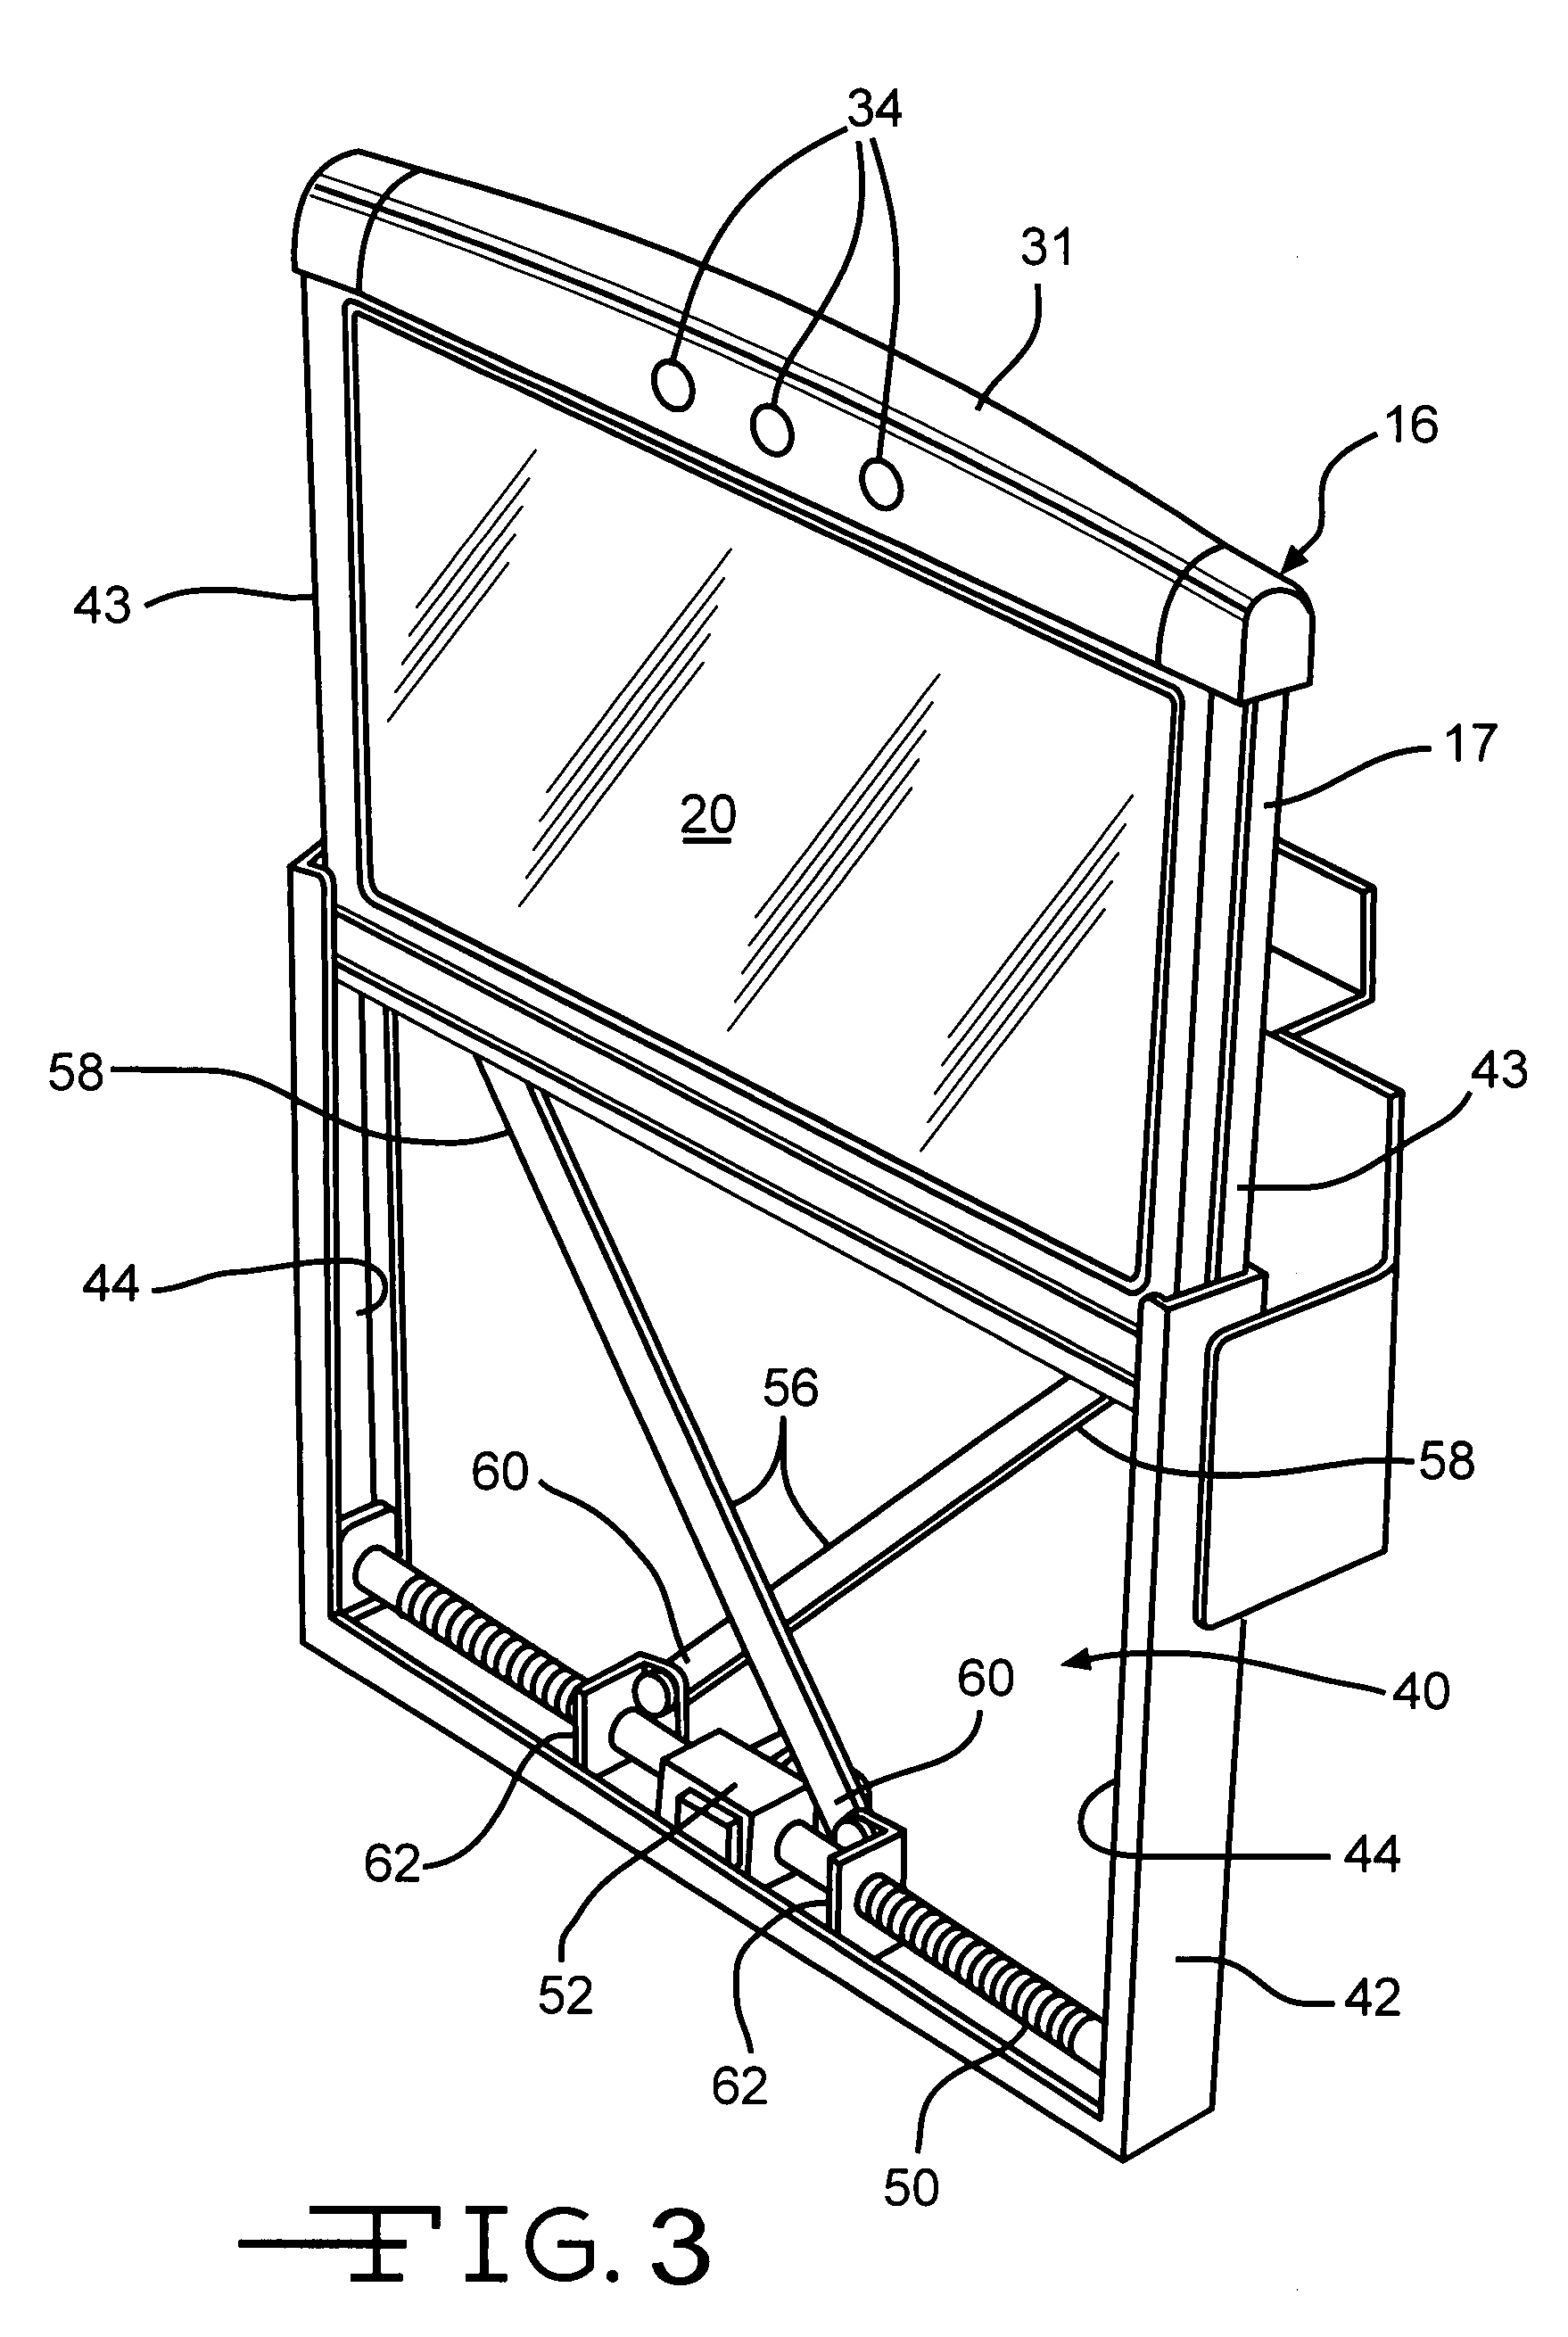 Vehicle seat having an electronic display mounted thereon